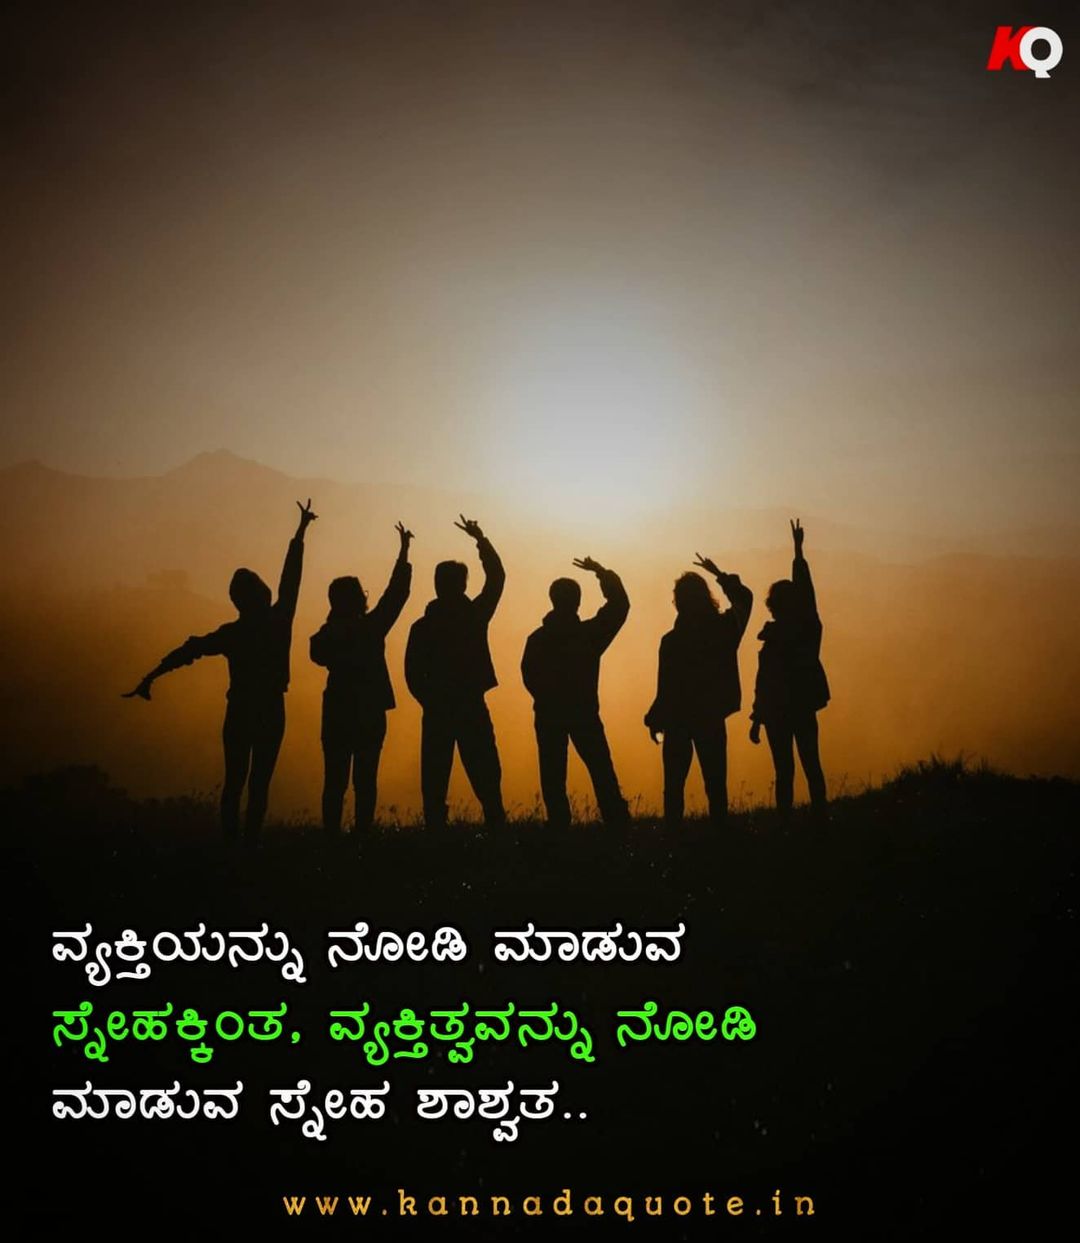 Friendship quotes in kannada language about life